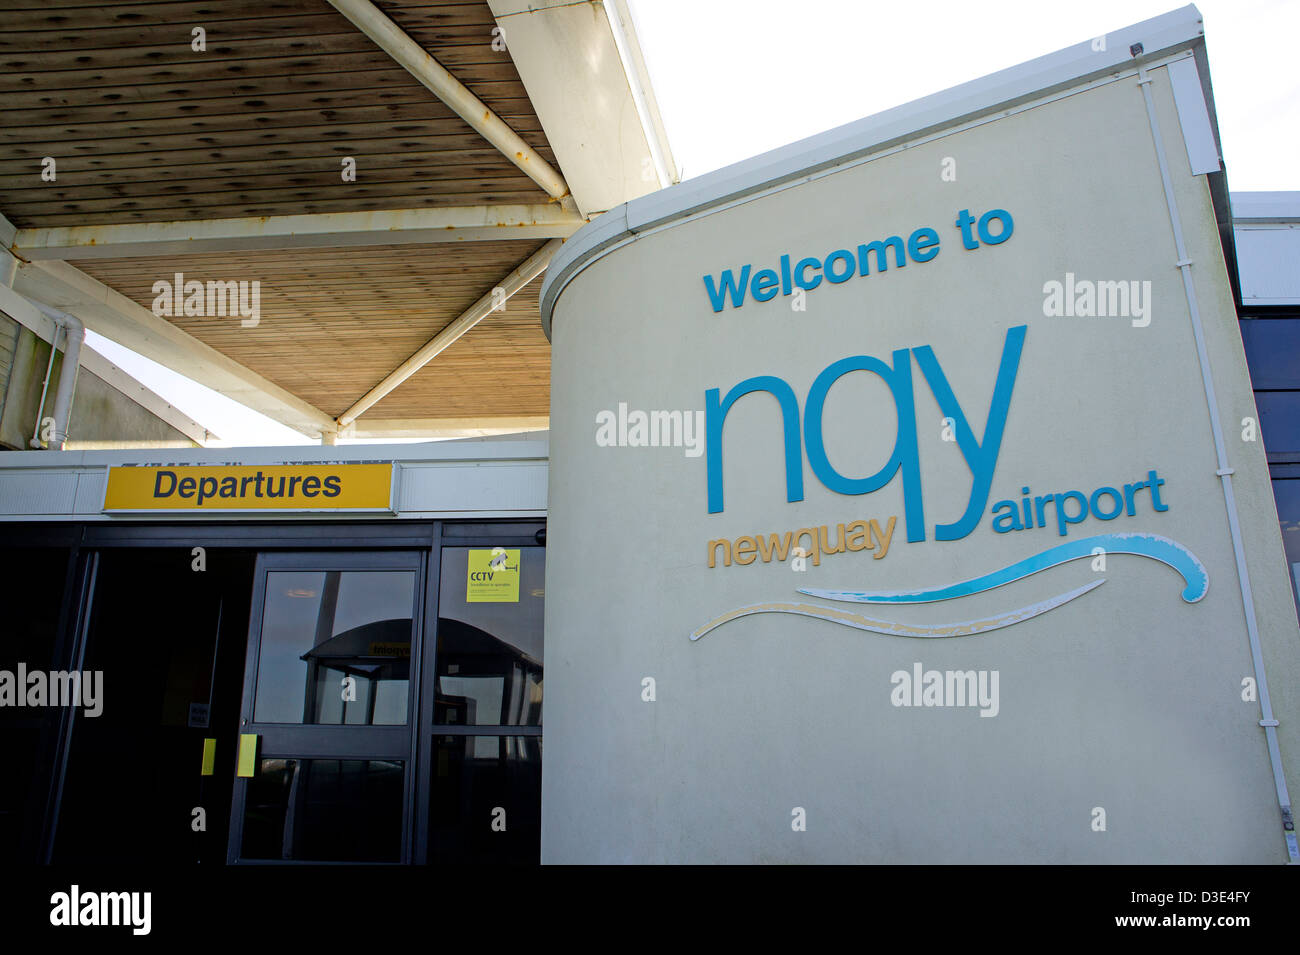 The entrance to the departures at Newquay airport in Cornwall, UK Stock Photo